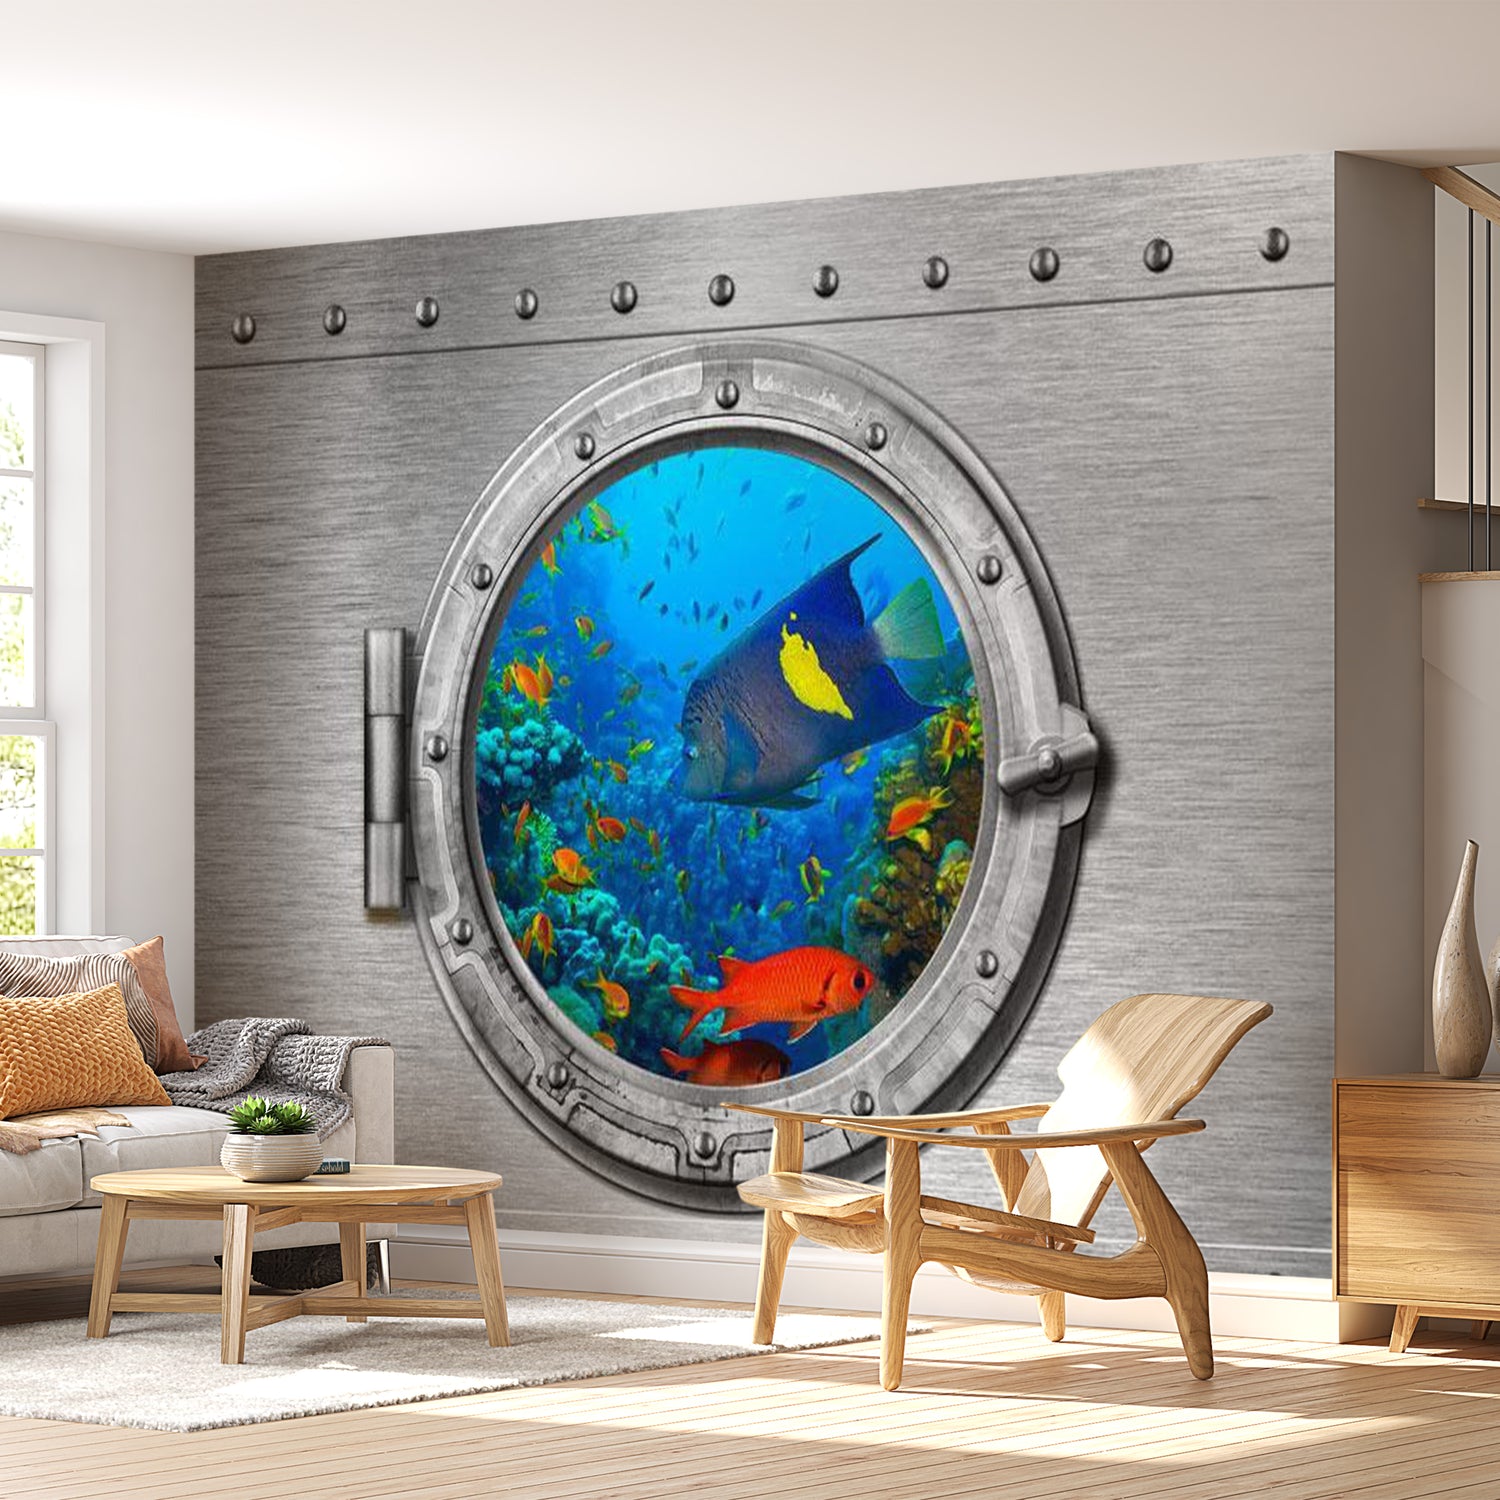 Peel & Stick Animal Wall Mural - Underwater Landscape - Removable Wall Decals